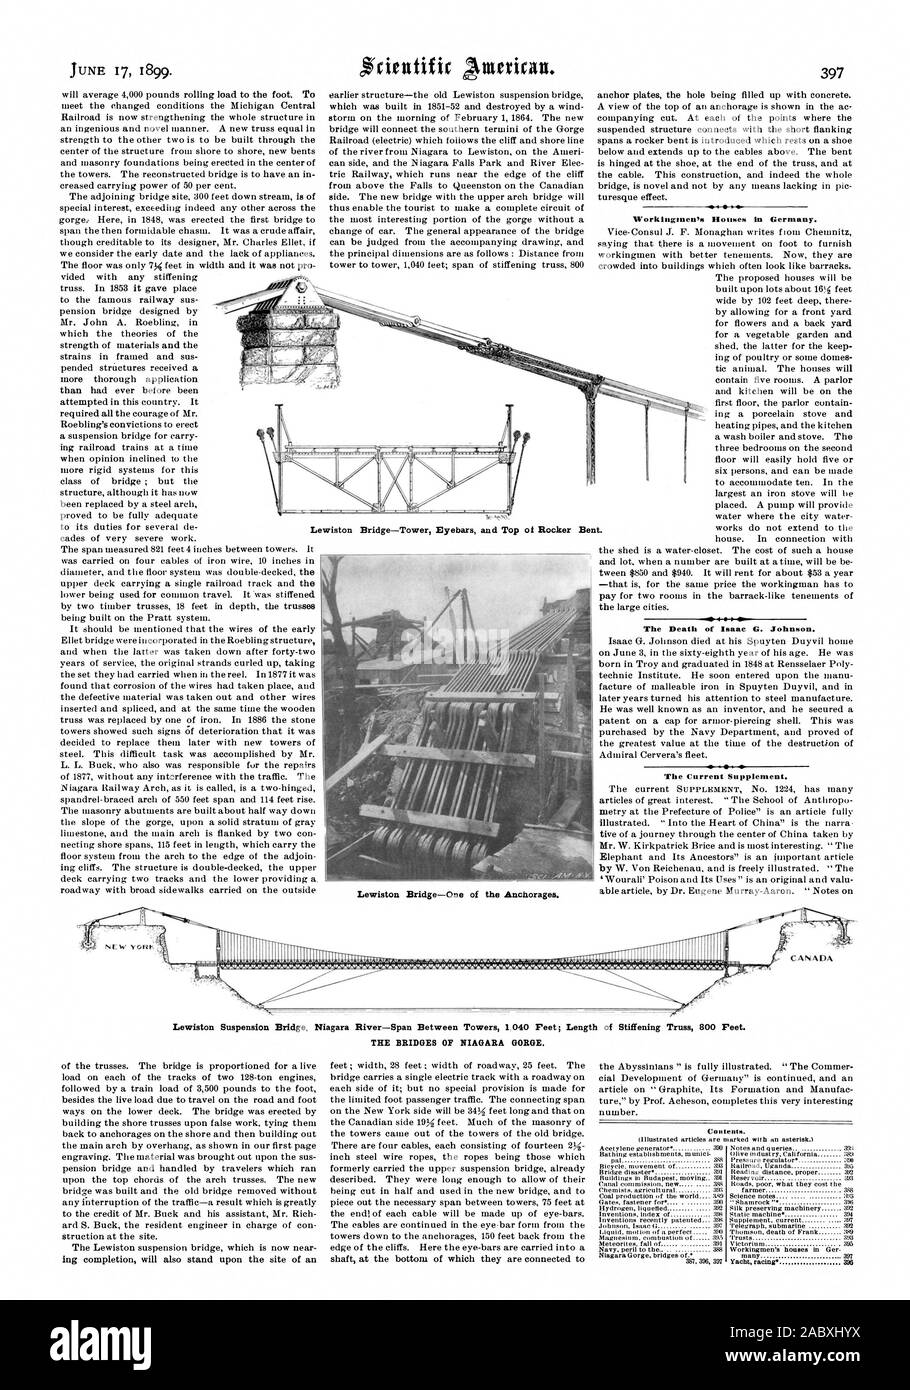 Lewiston Bridge—One of the Anchorages. Workingmen's Houses in Germany. The Death of Isaac G. Johnson. The Current Supplement. wiston Bridge—Tower Eyebars and Top of Rocker Bent. Le Lewiston Suspension Bridge Niagara River—Span Between Towers 1 040 Feet; Length of Stiffening Truss 800 Feet. THE BRIDGES OF NIAGARA GORGE., scientific american, 1899-06-17 Stock Photo